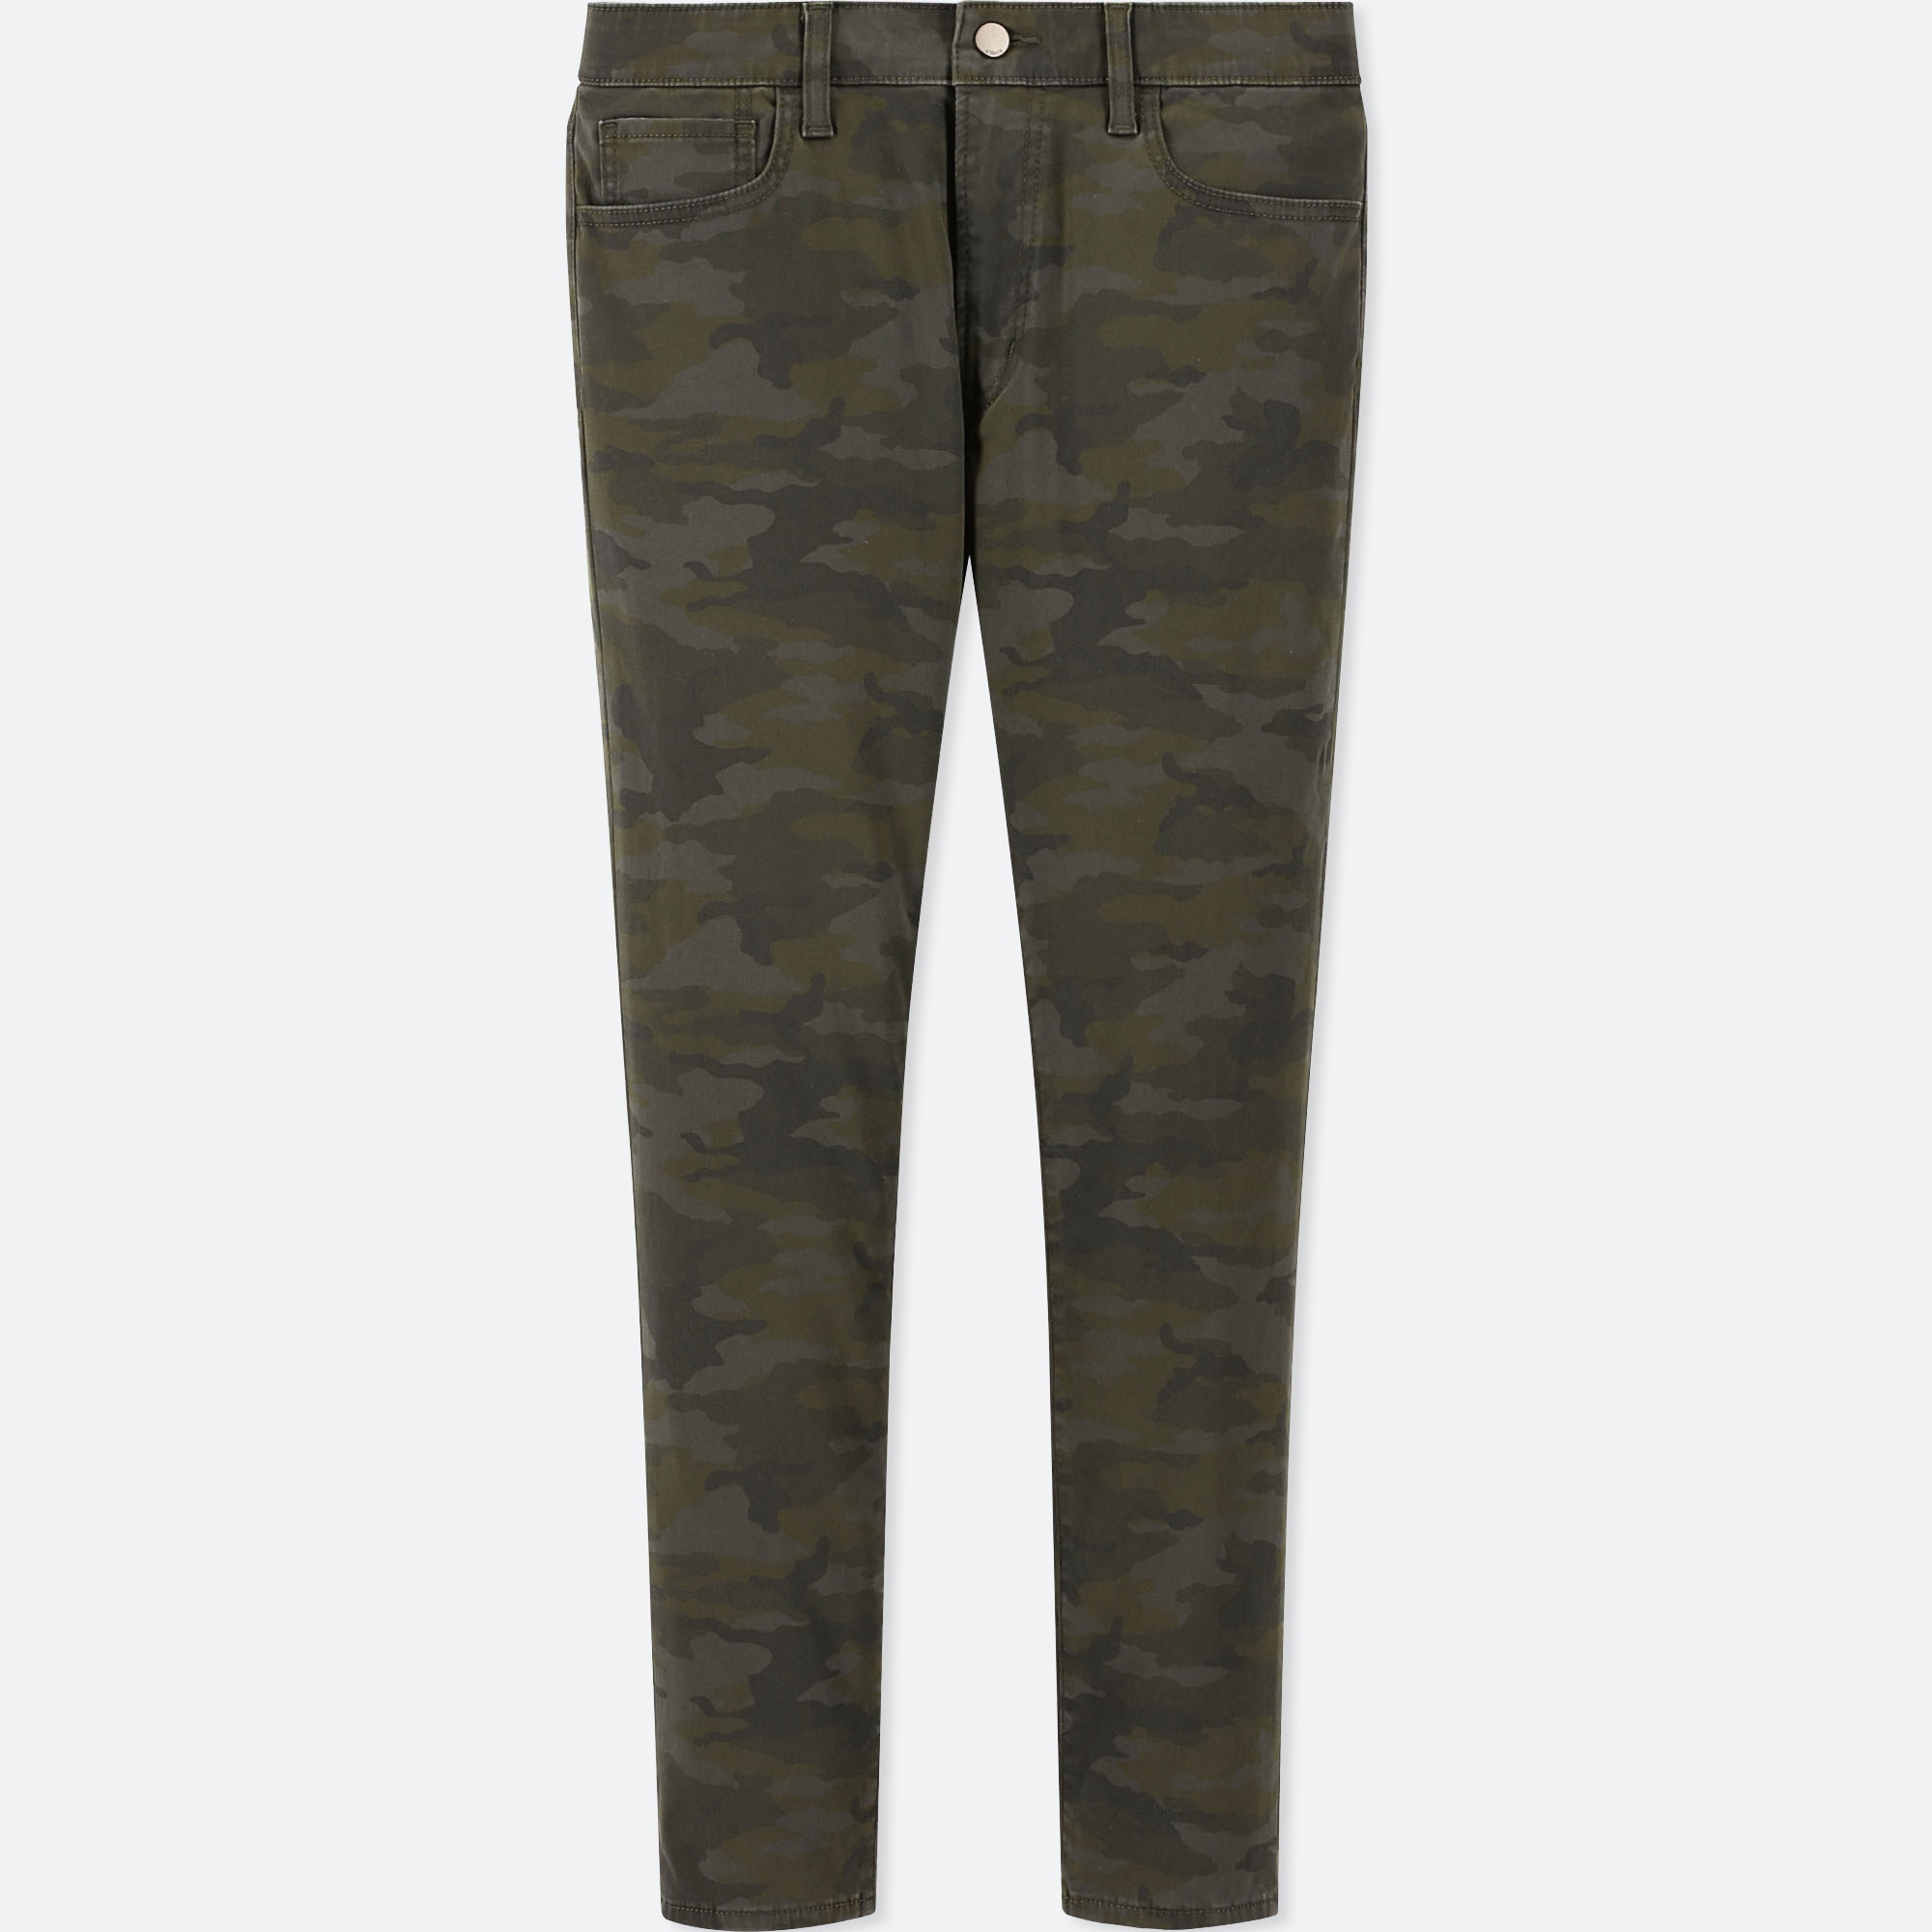 ezy skinny fit colored jeans